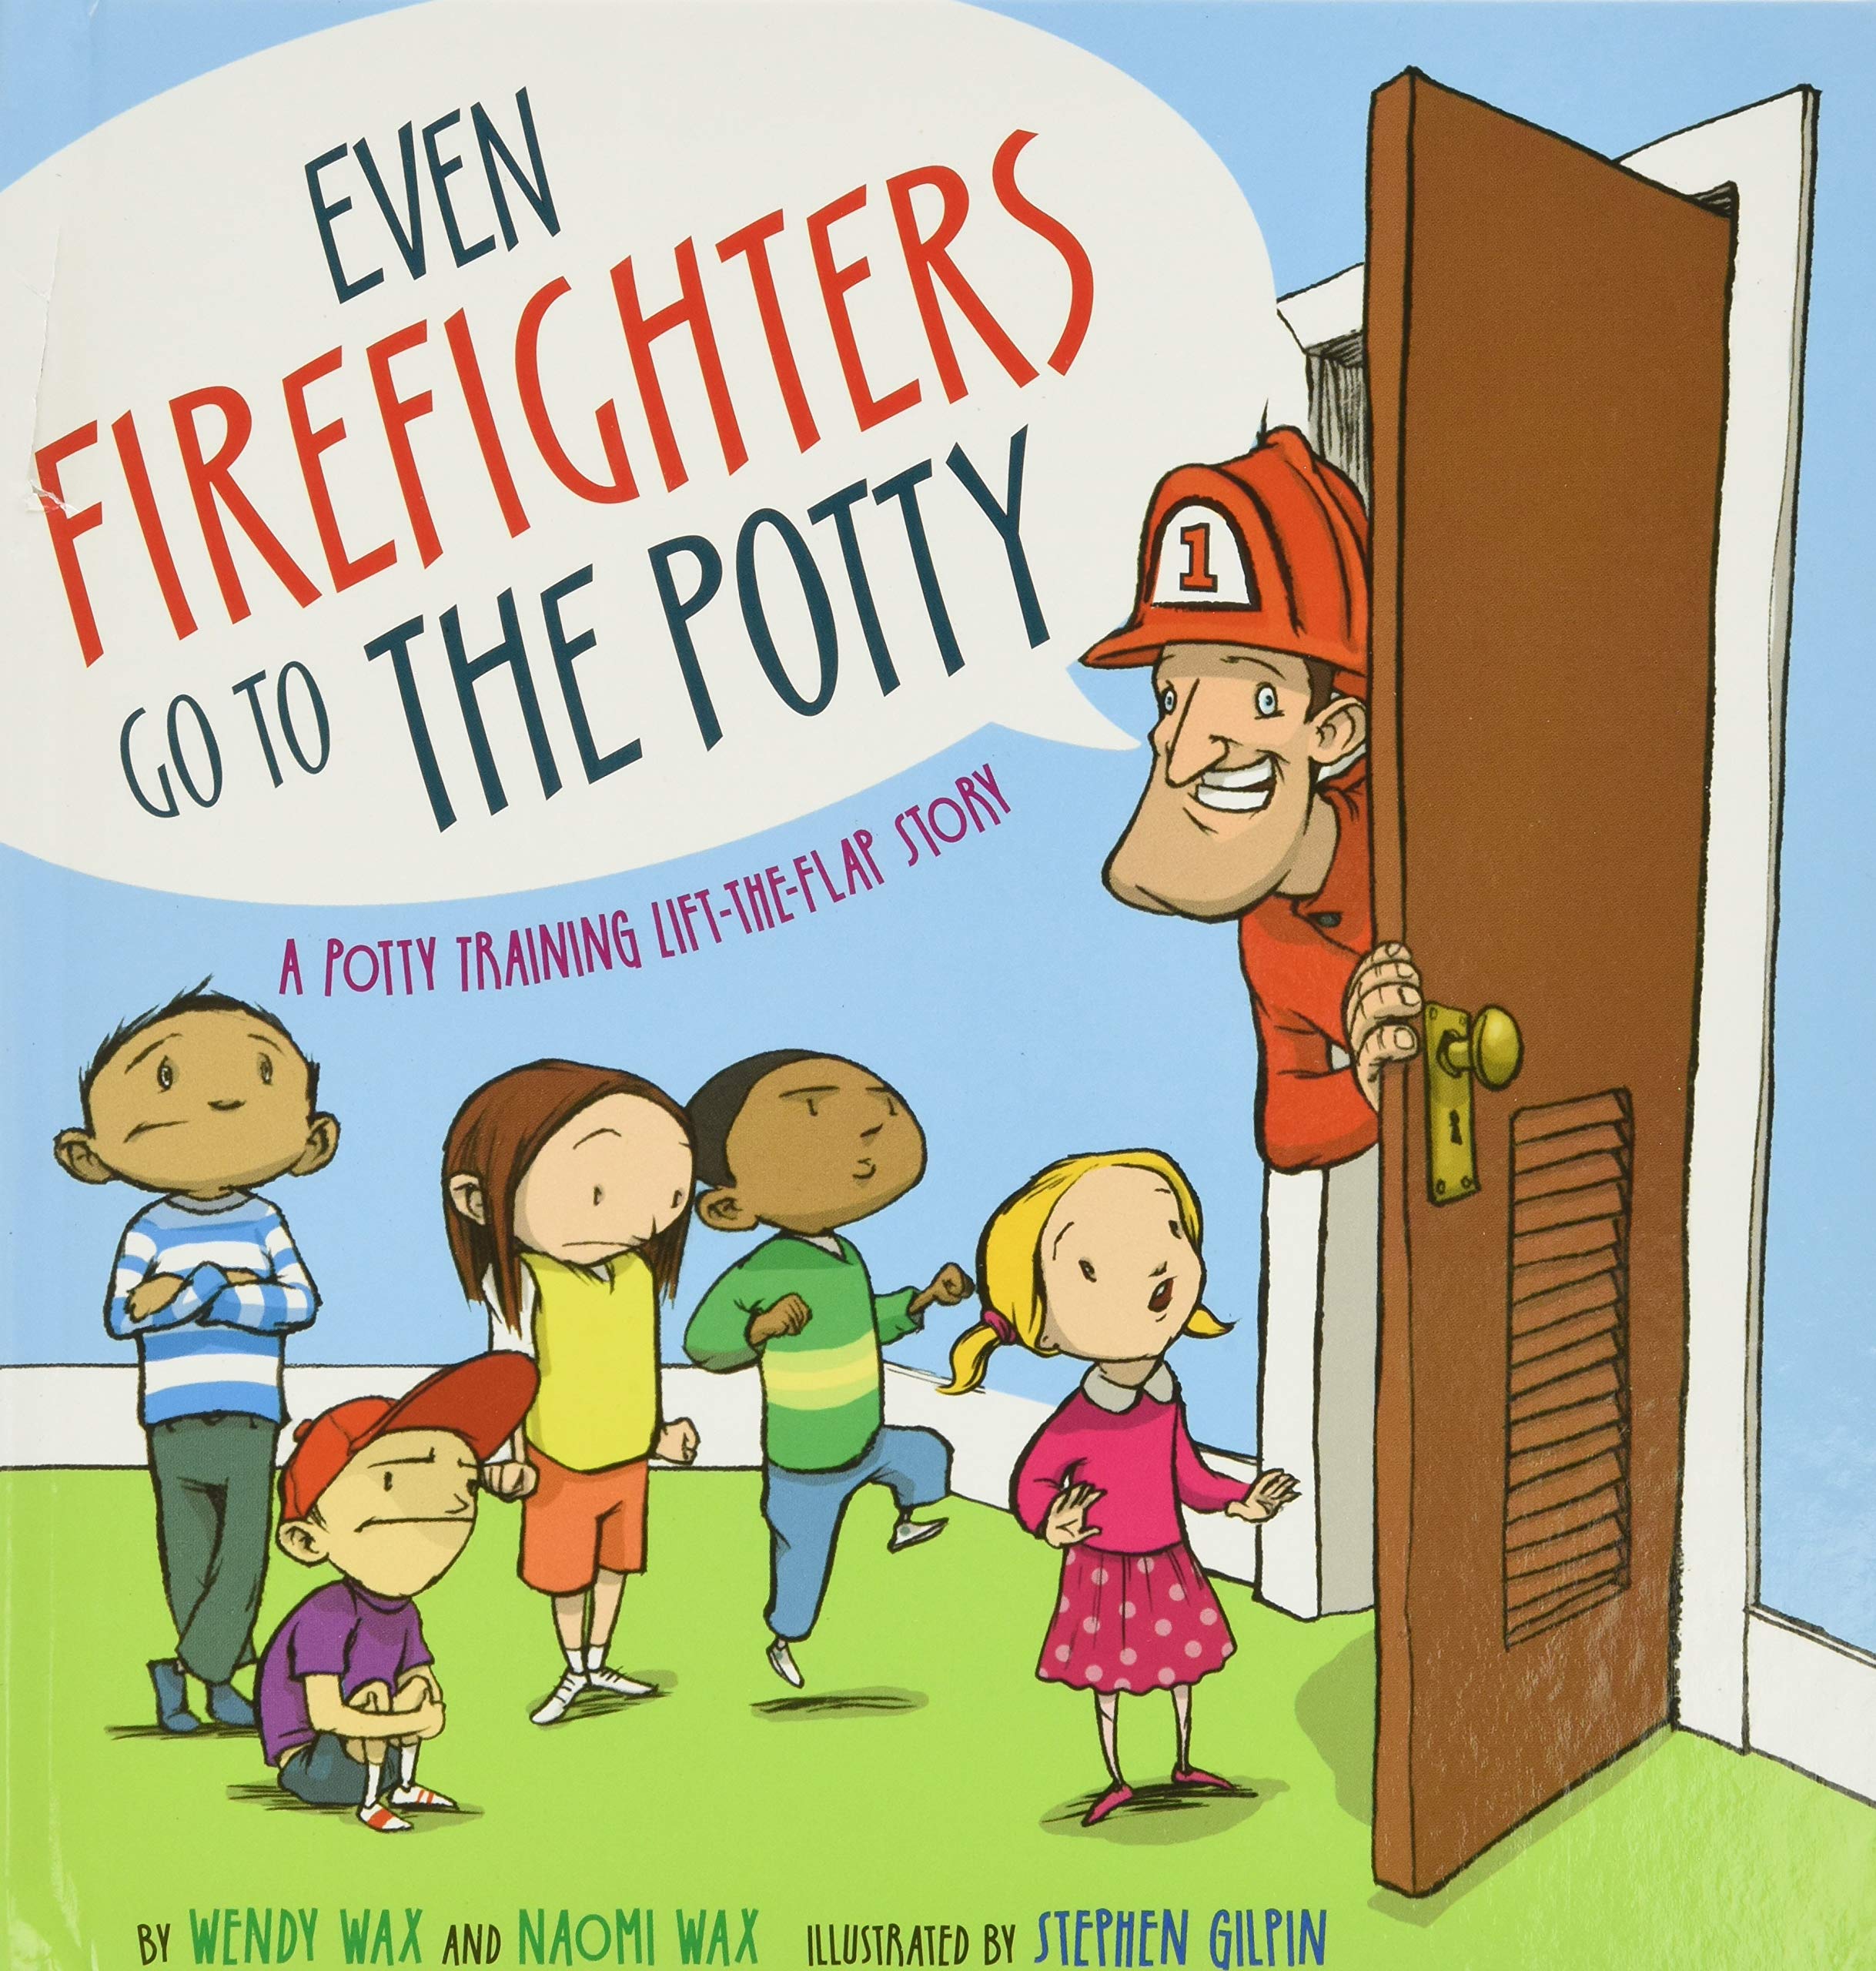 Book Cover Even Firefighters Go to the Potty: A Potty Training Lift-the-Flap Story